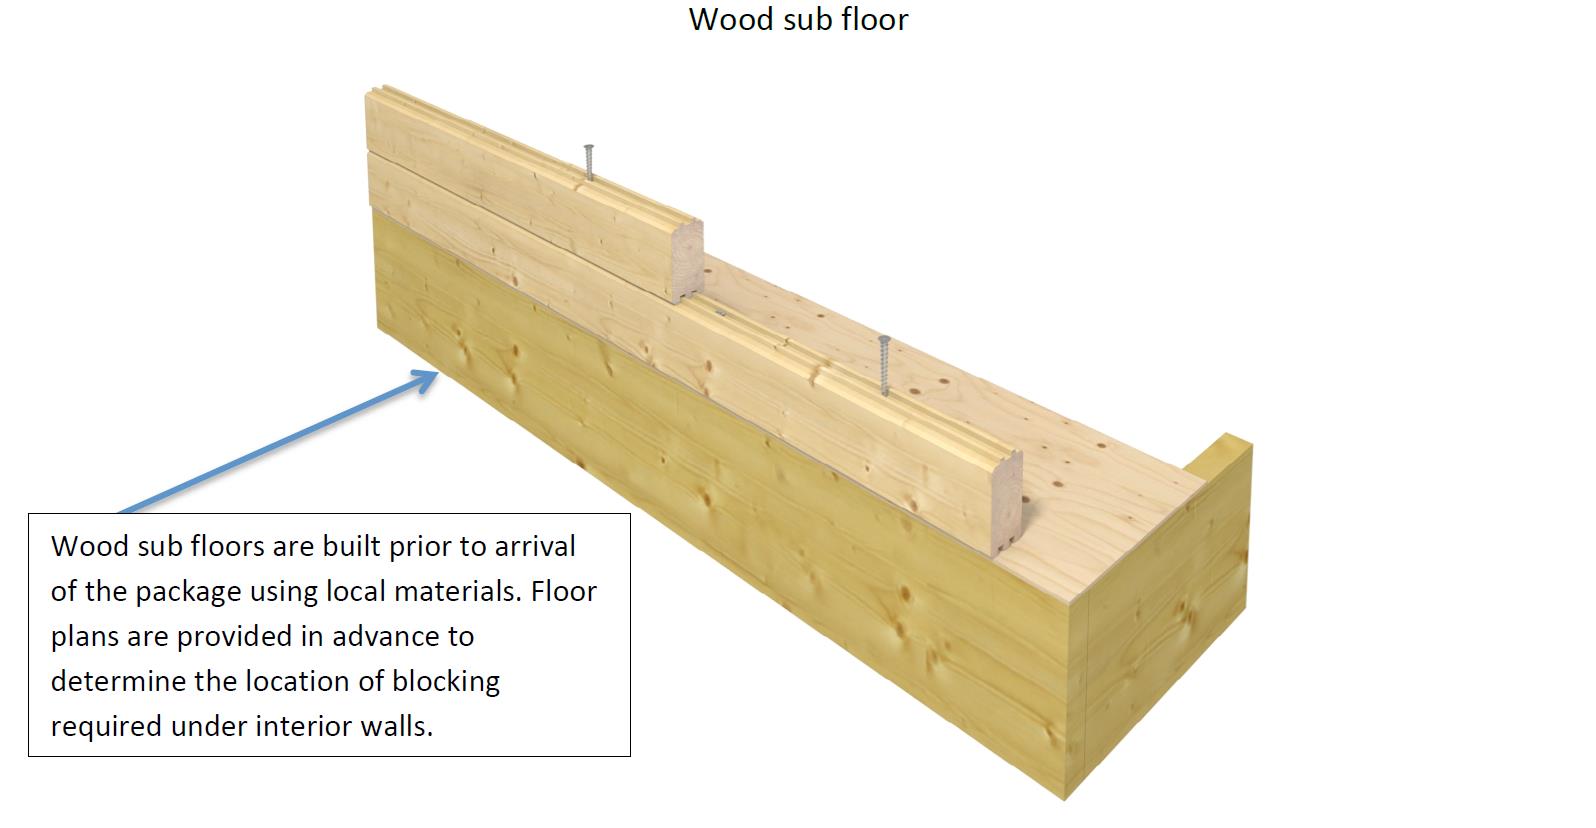 Wood sub floor - Mounting first two rows of wall logs to foundation